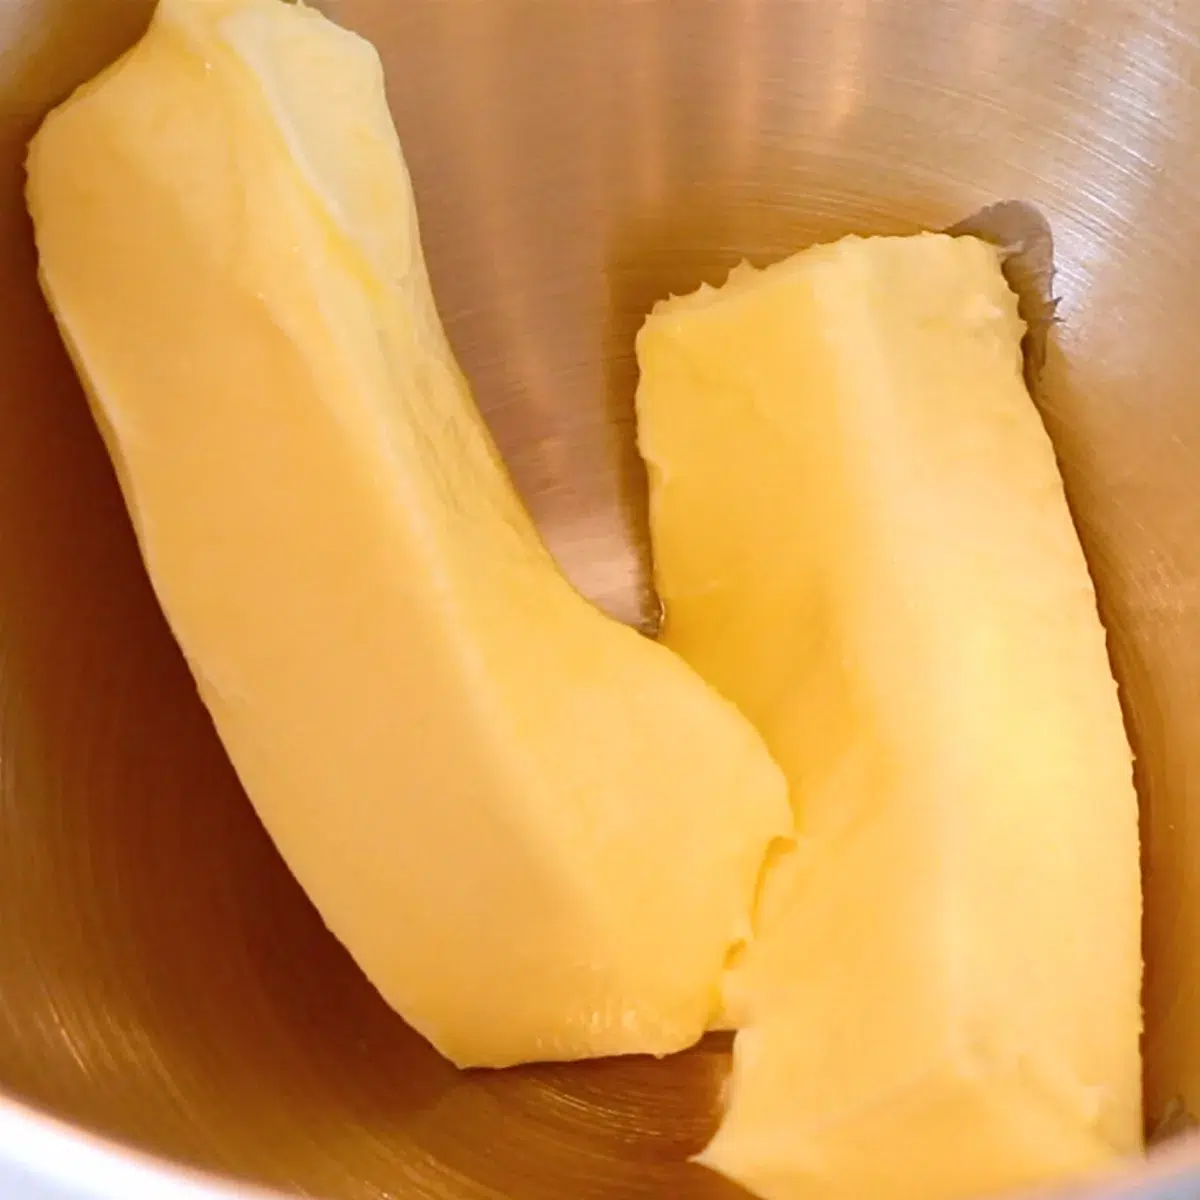 2 sticks of soft butter in a bowl